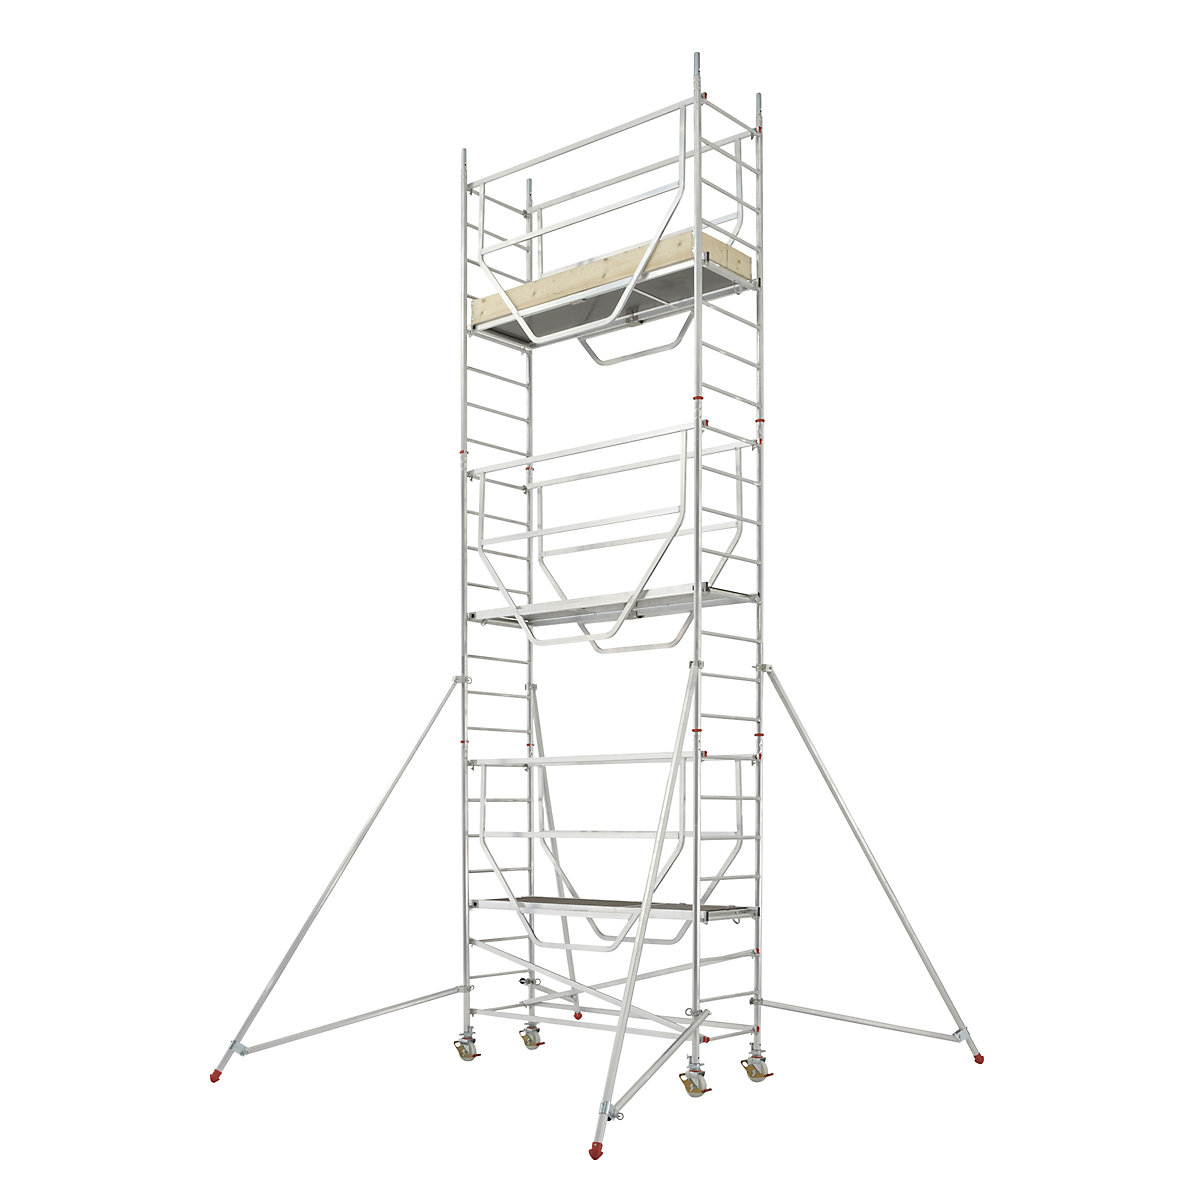 ADVANCED SAFE-T 7075 mobile access tower – HYMER, welded, platform 2.08 x 0.61 m, max. working height 7.25 m-15